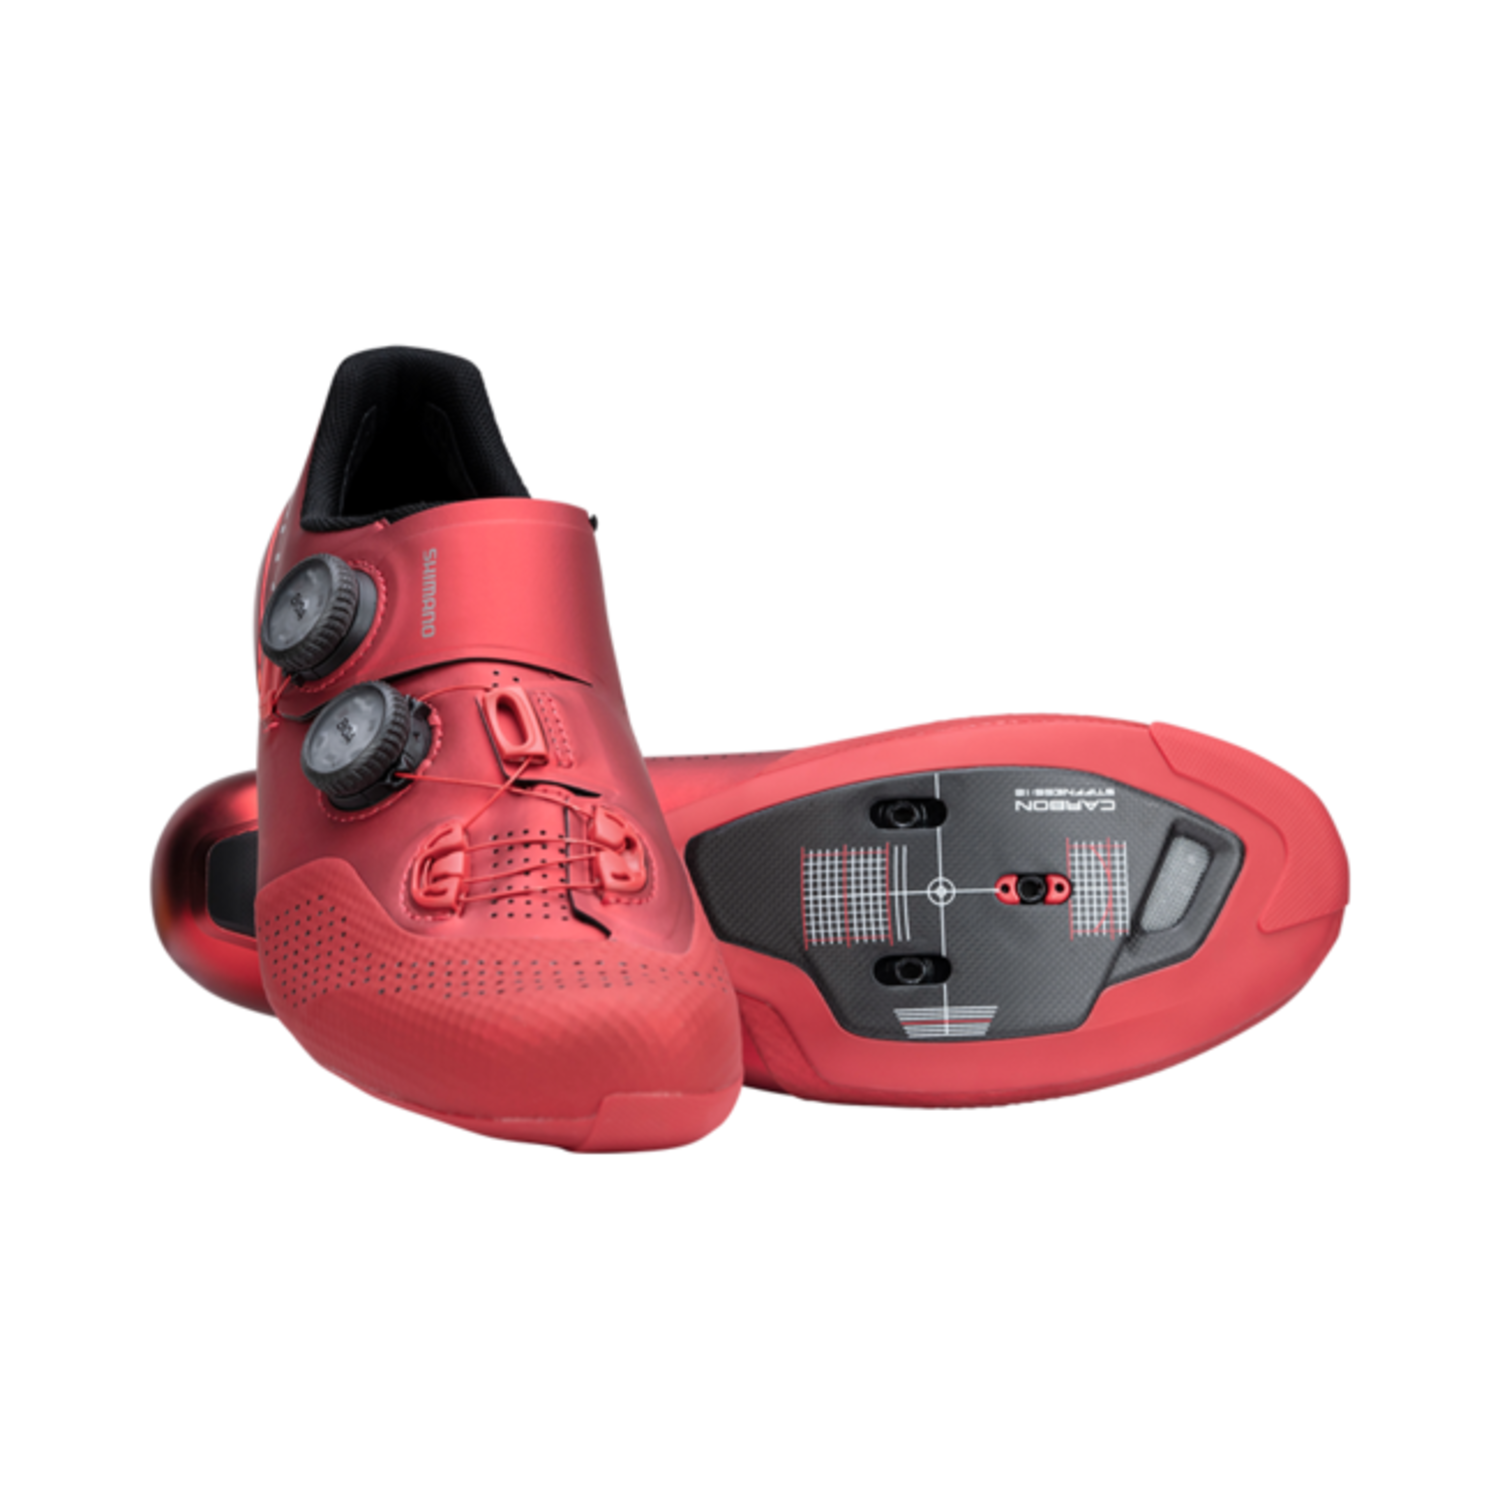 Shimano SH-RC902 S-PHYRE BICYCLE SHOES